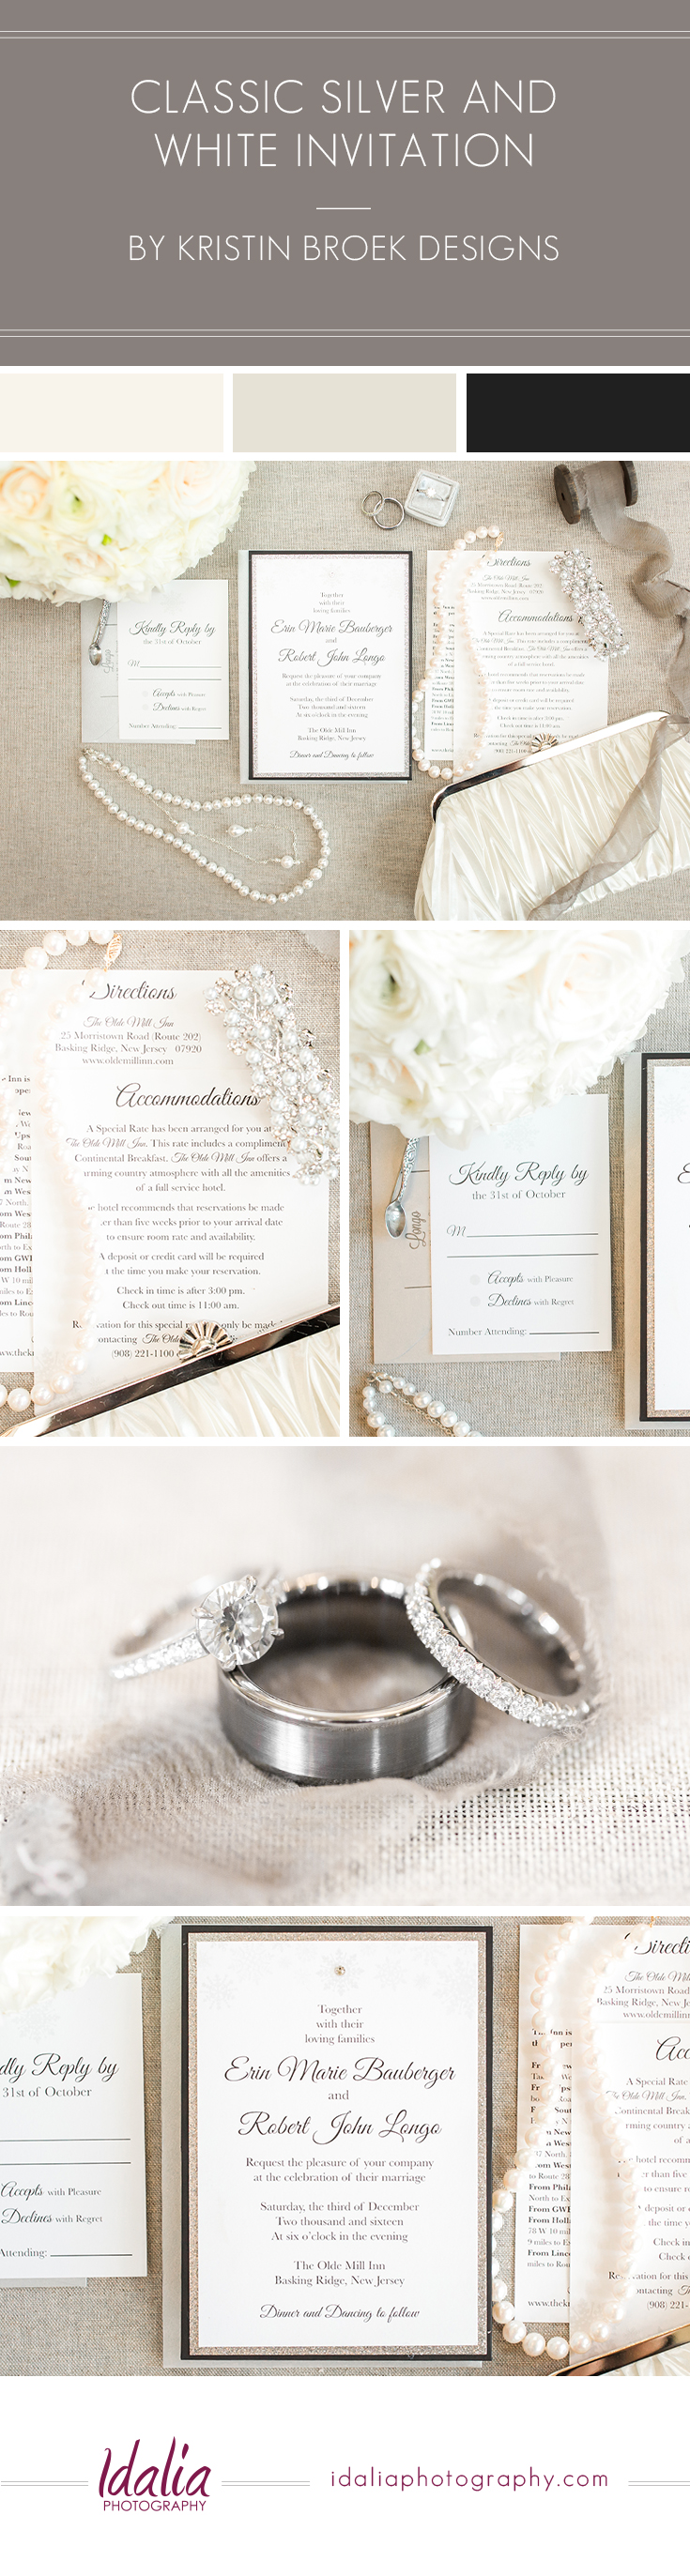 Classic white and silver wedding invitation by Kristin Broek Designs